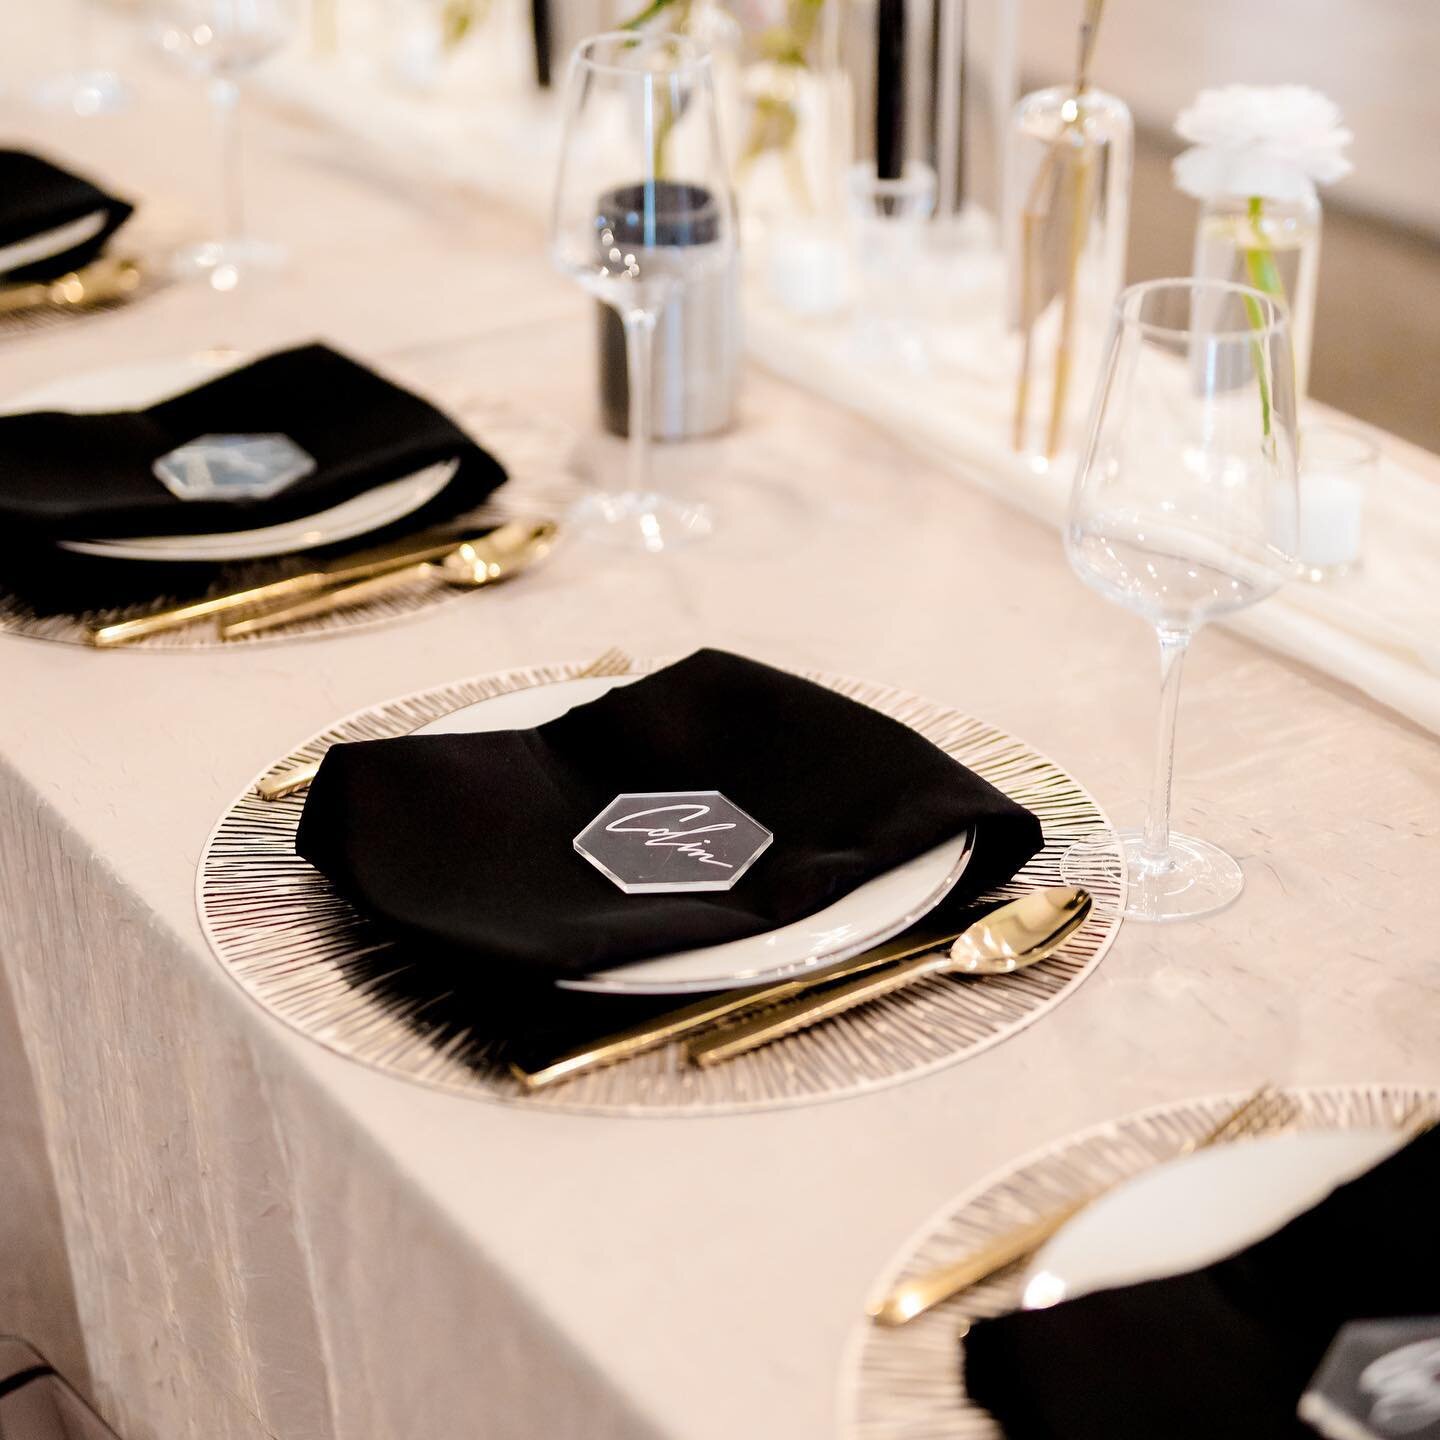 We loved this modern, yet classic look from a recent FHG wedding! 

@firstclasscateringin catered the wedding (which includes everything you need like china, silverware, glassware, and more).

@firstclasseventsin coordinated the entire day to make su